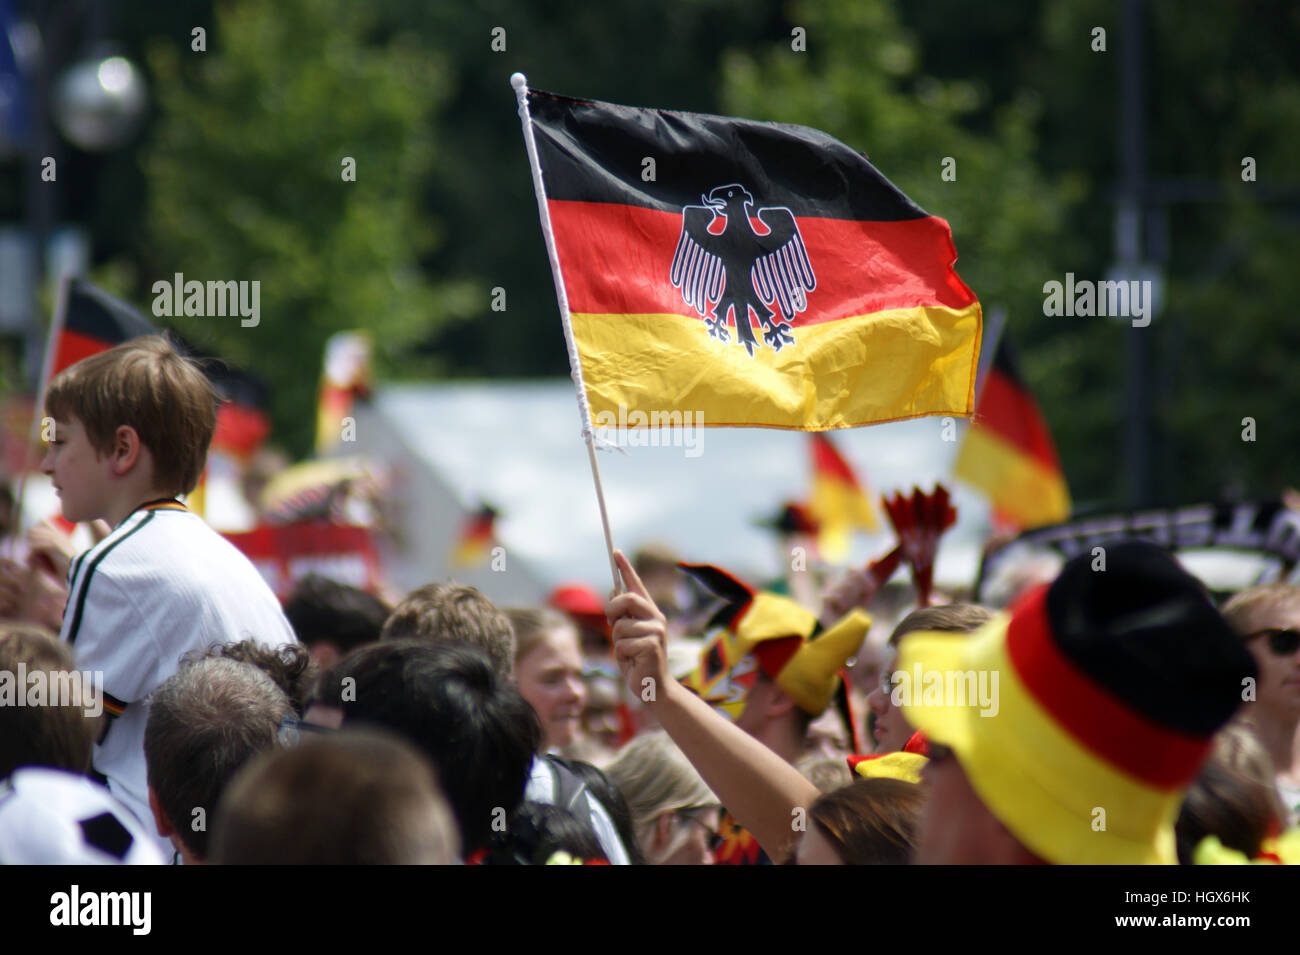 German flag being raised by a person in a crowd in Berlin, German that is celebrating the German win of the 2015 World Cup. Stock Photo